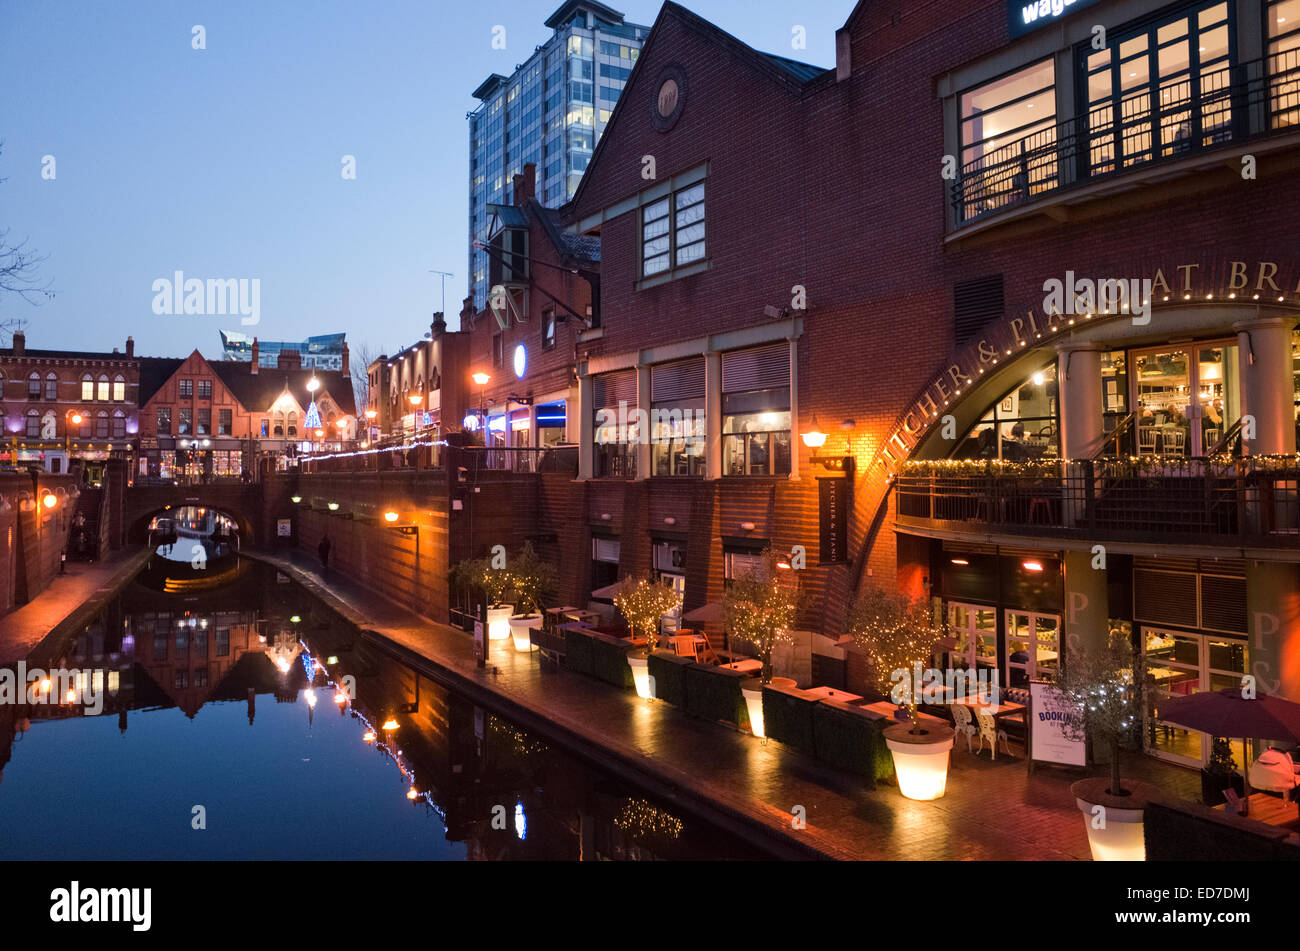 Restaurants and bars along the canal at Brindleyplace in Birmingham